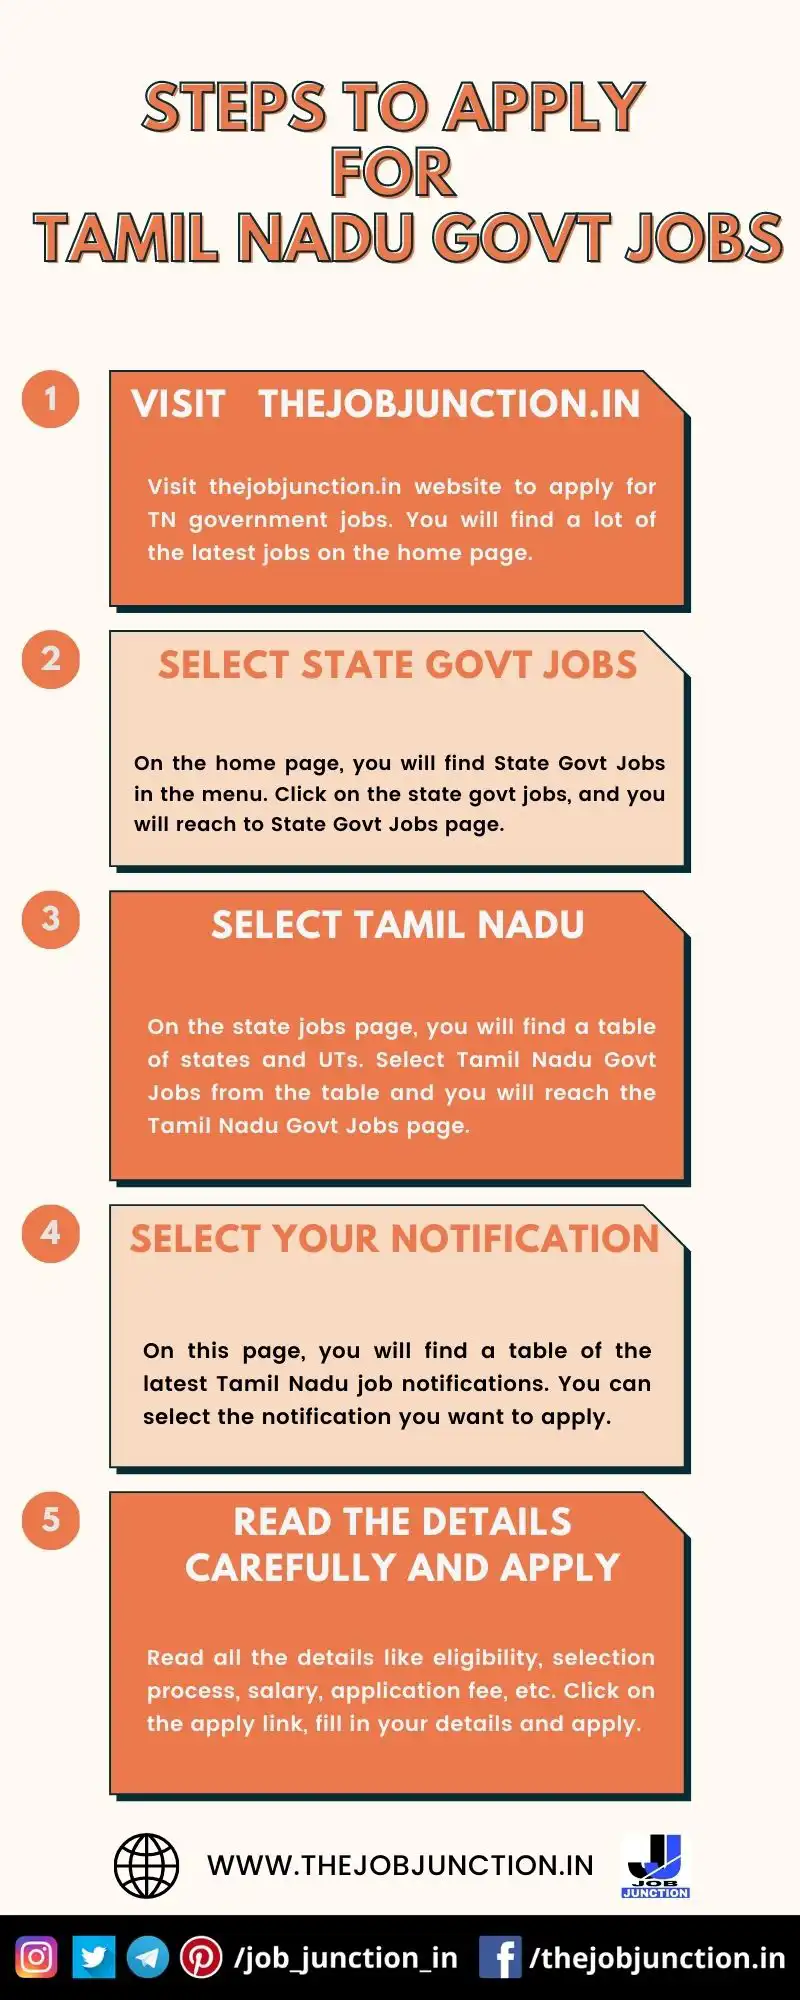 STEPS TO APPLY FOR TN GOVT JOBS